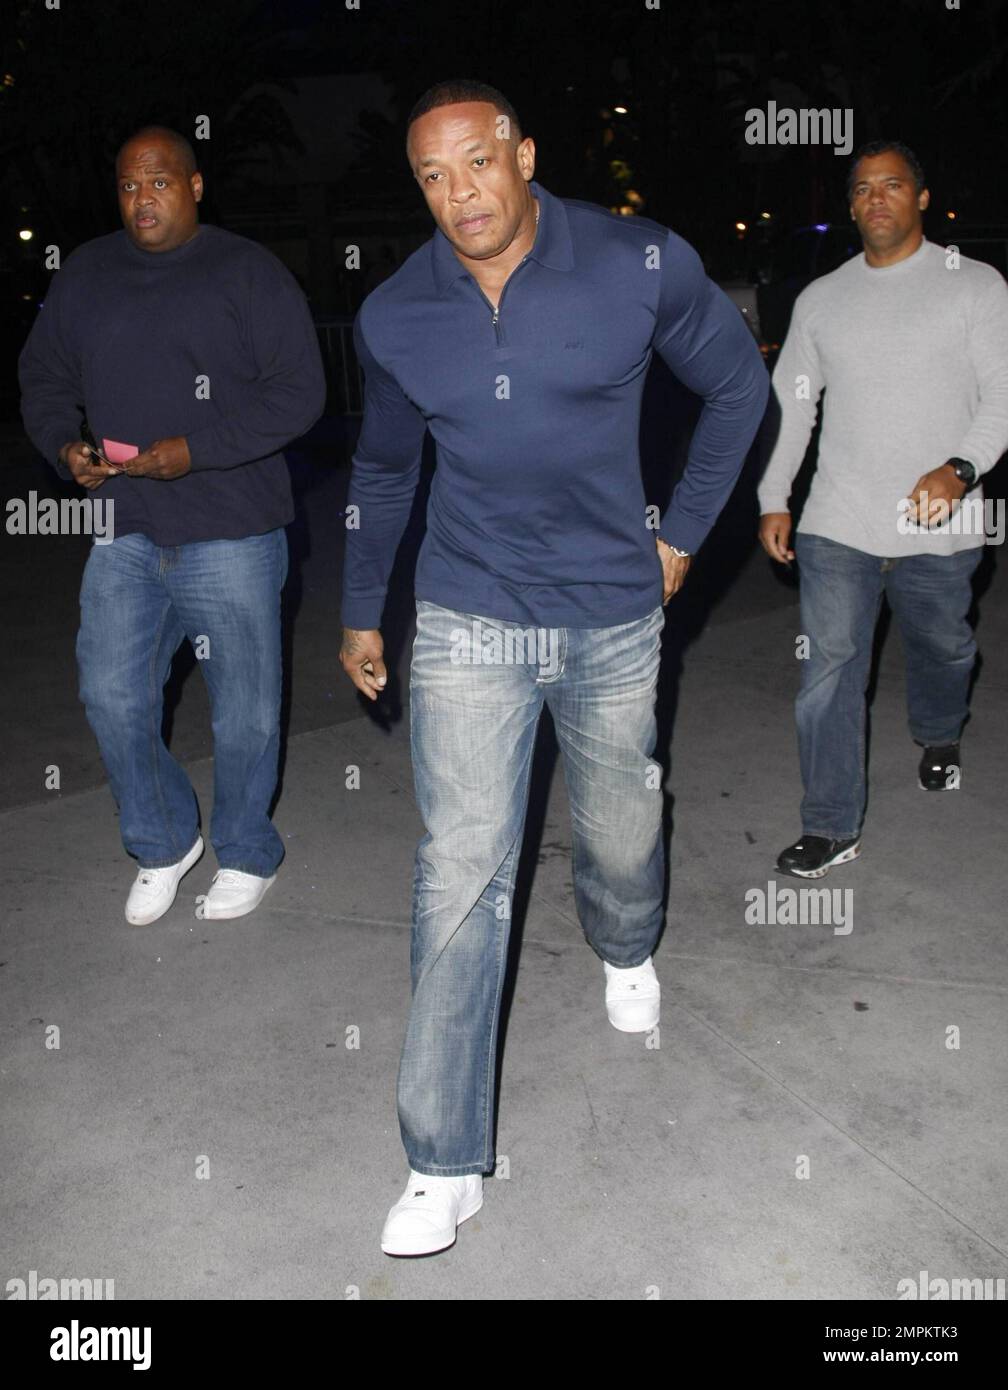 Dr. Dre (aka Andre Romelle Young) at the Staples Center for the LA Lakers vs. New York Knicks basketball game that saw the Lakers beat the Knicks 109-87. Los Angeles, CA. 01/09/11. Stock Photo